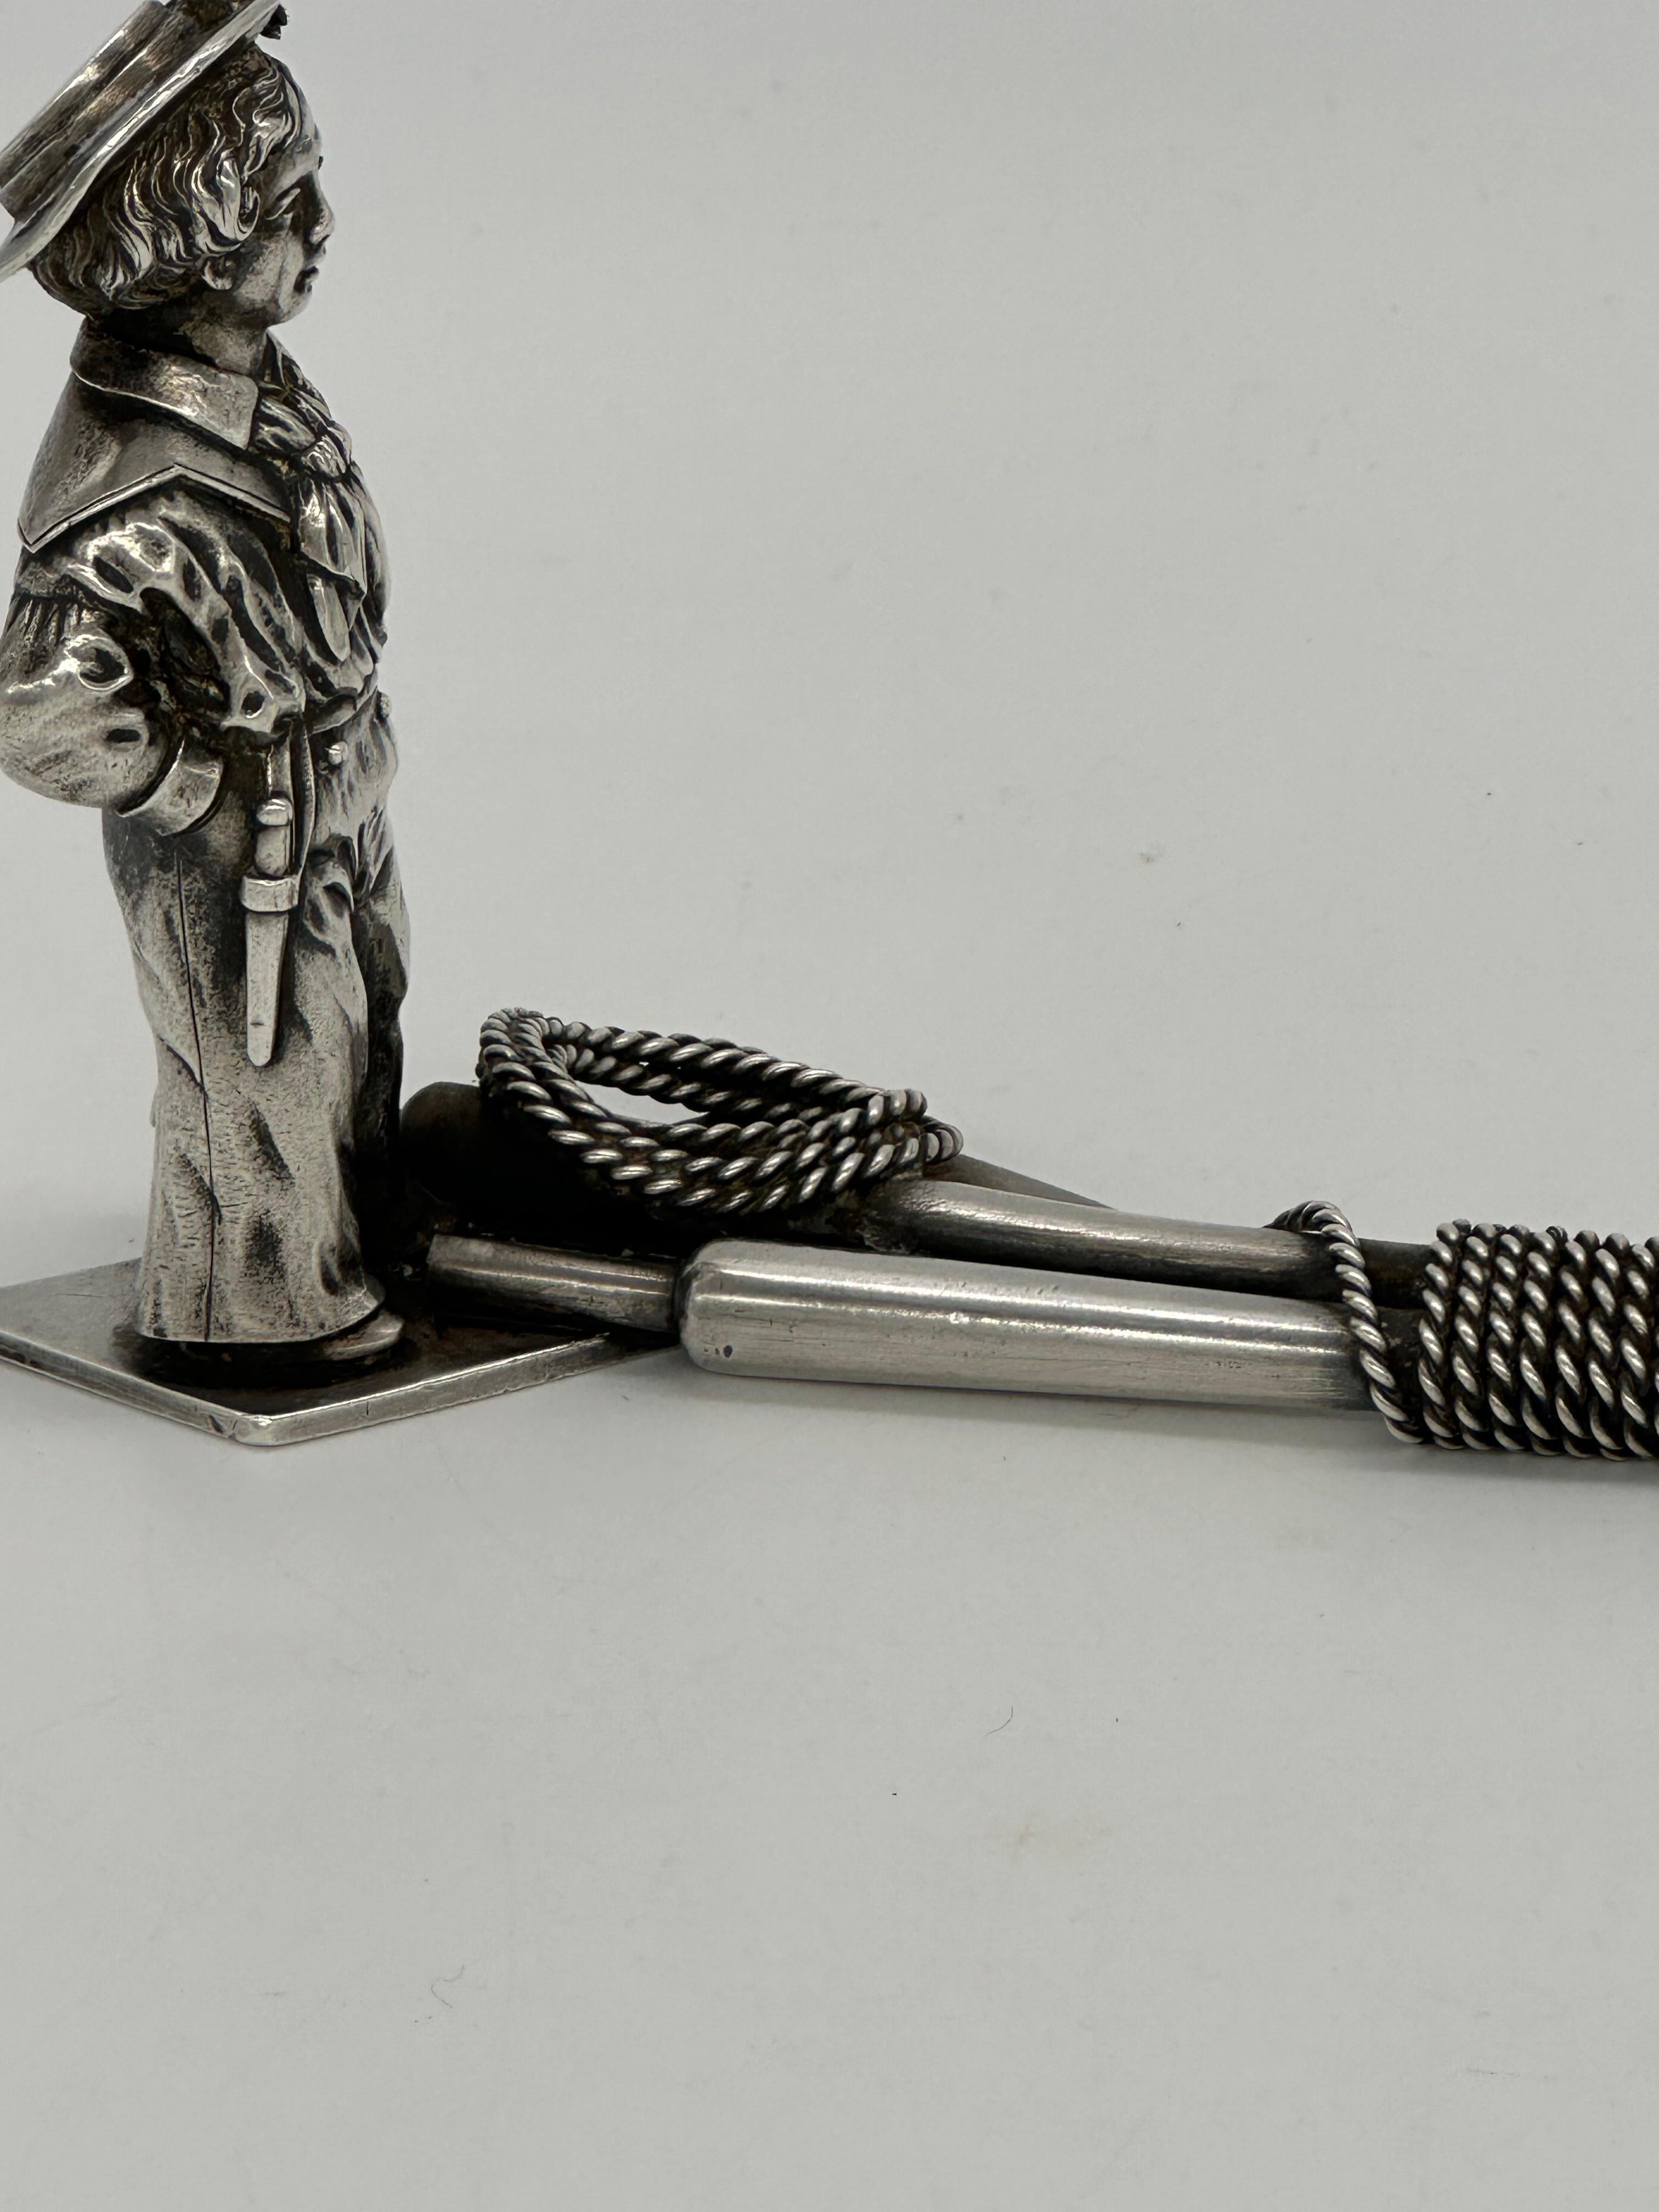 19th Century Important Russian silver paper knife, Edward VII as a child, English royalty For Sale